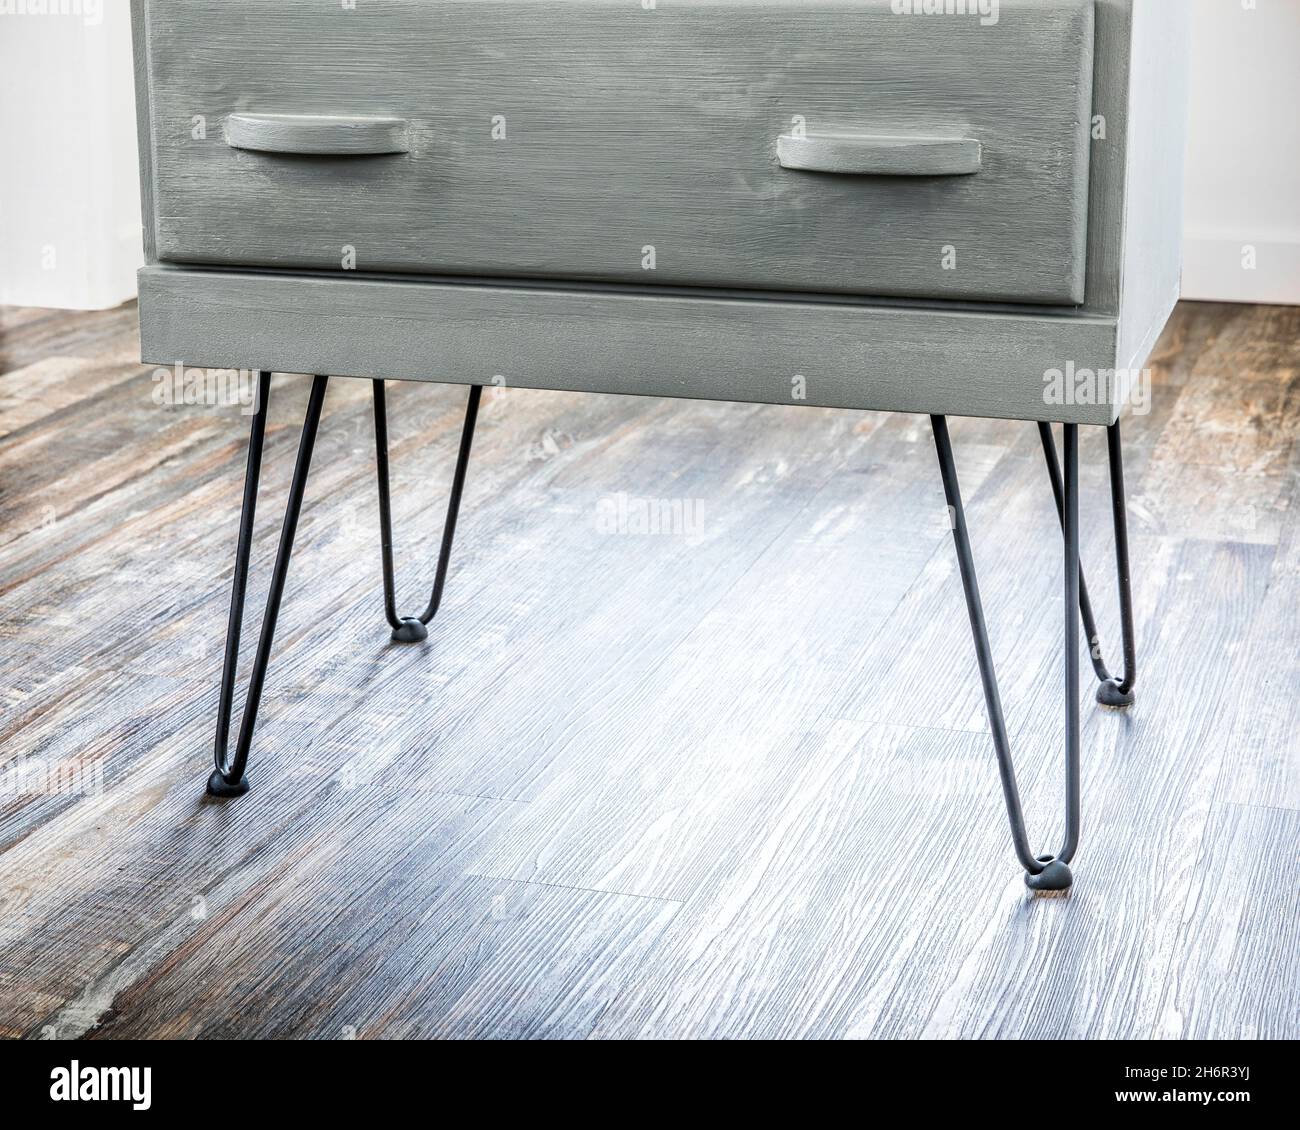 Hairpin legs on a furniture piece. Stock Photo